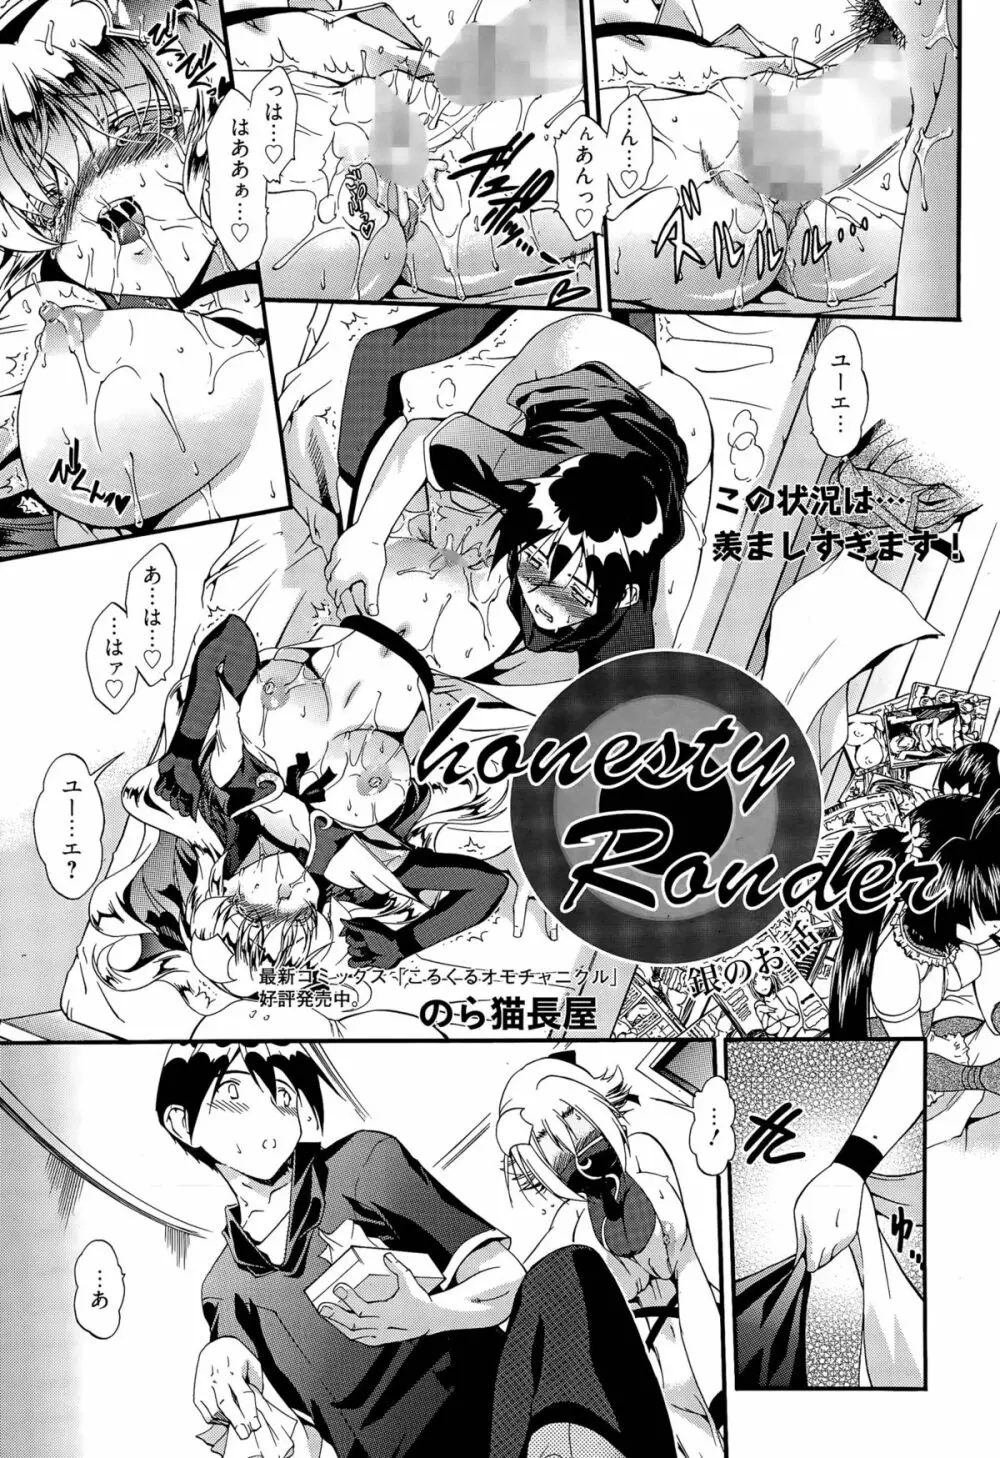 honesty Ronder 第1-2話 Page.25